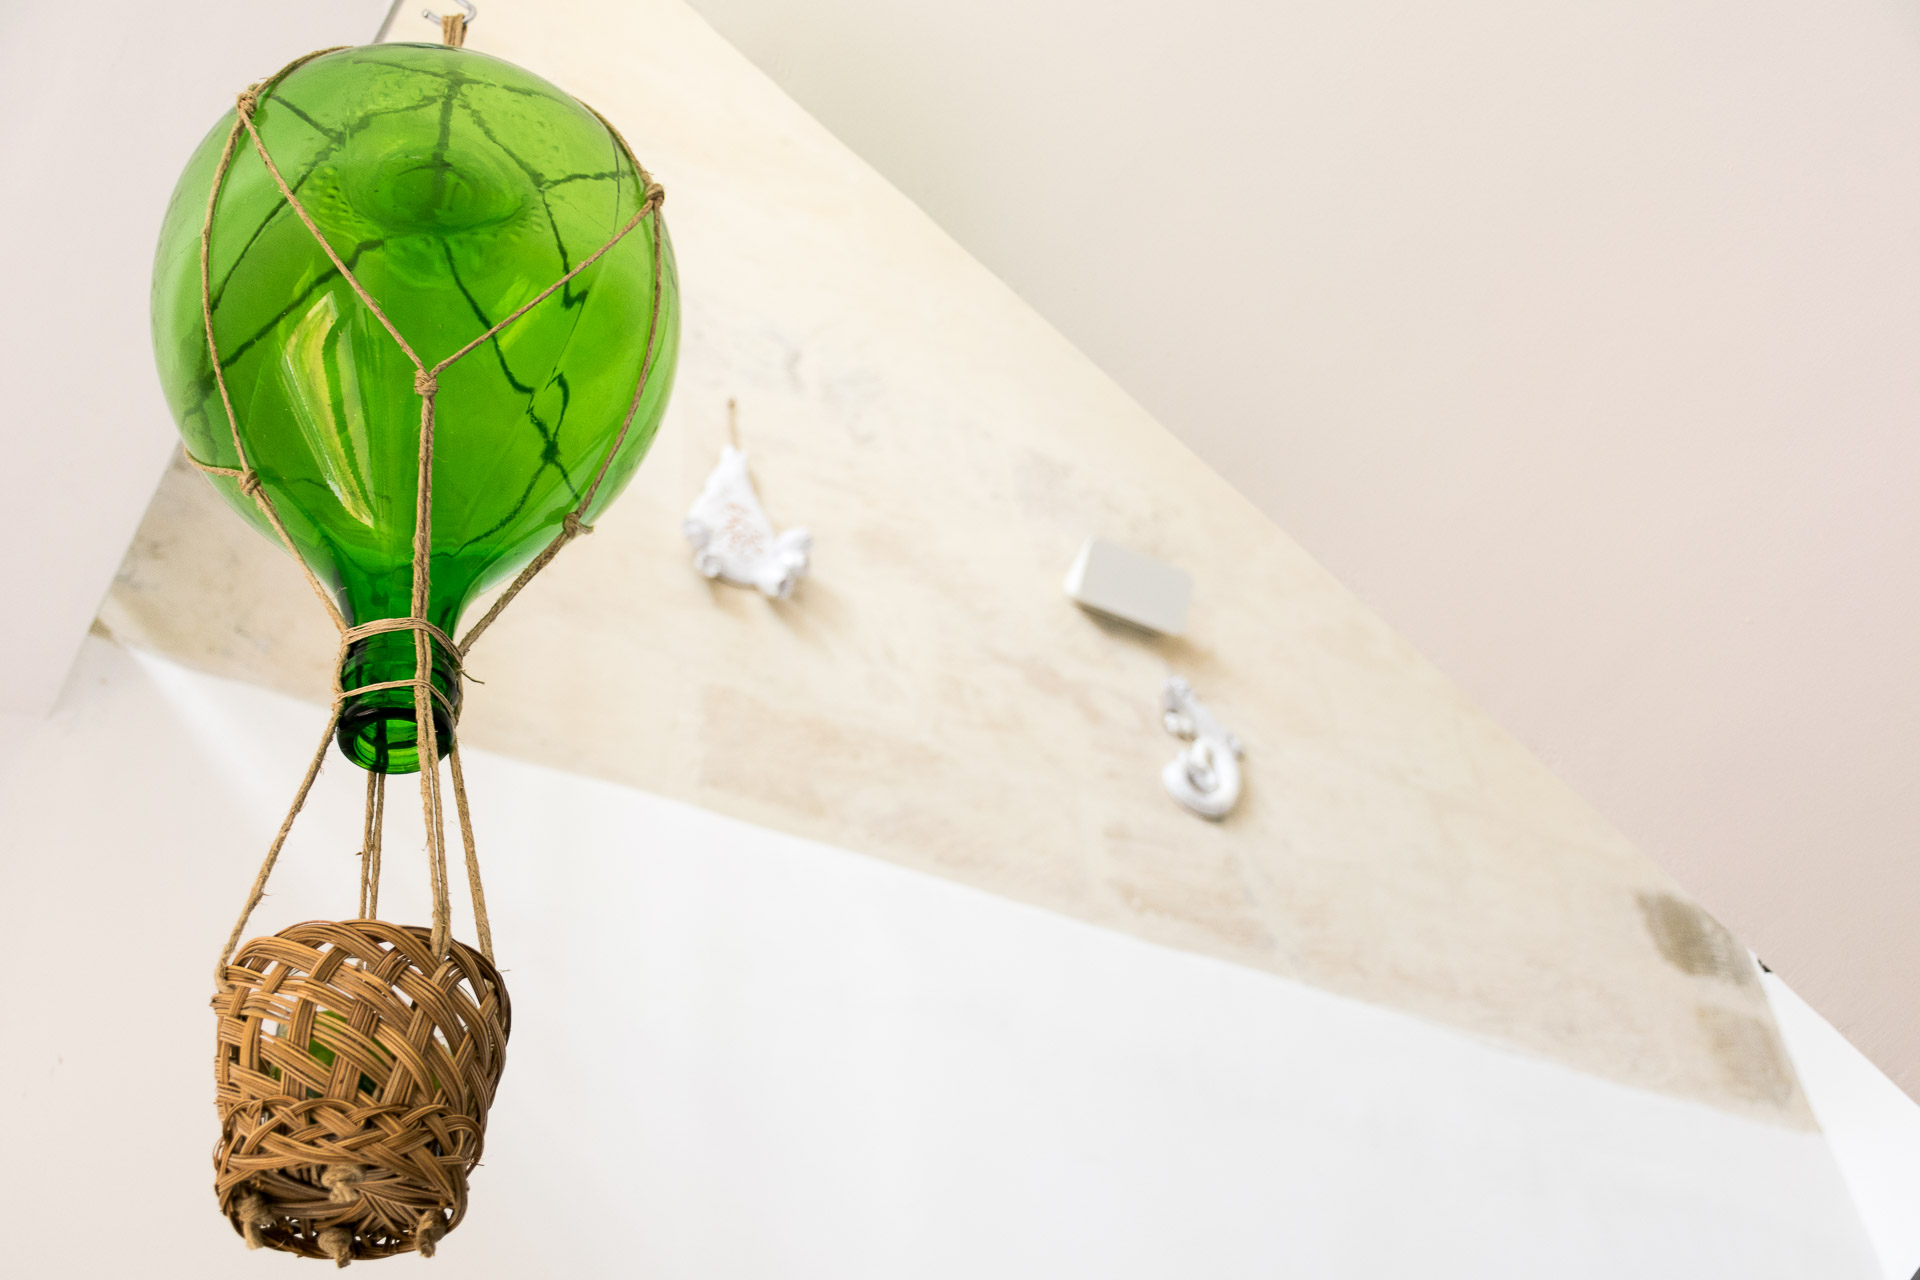 A glass and straw balloon art hanging in a room